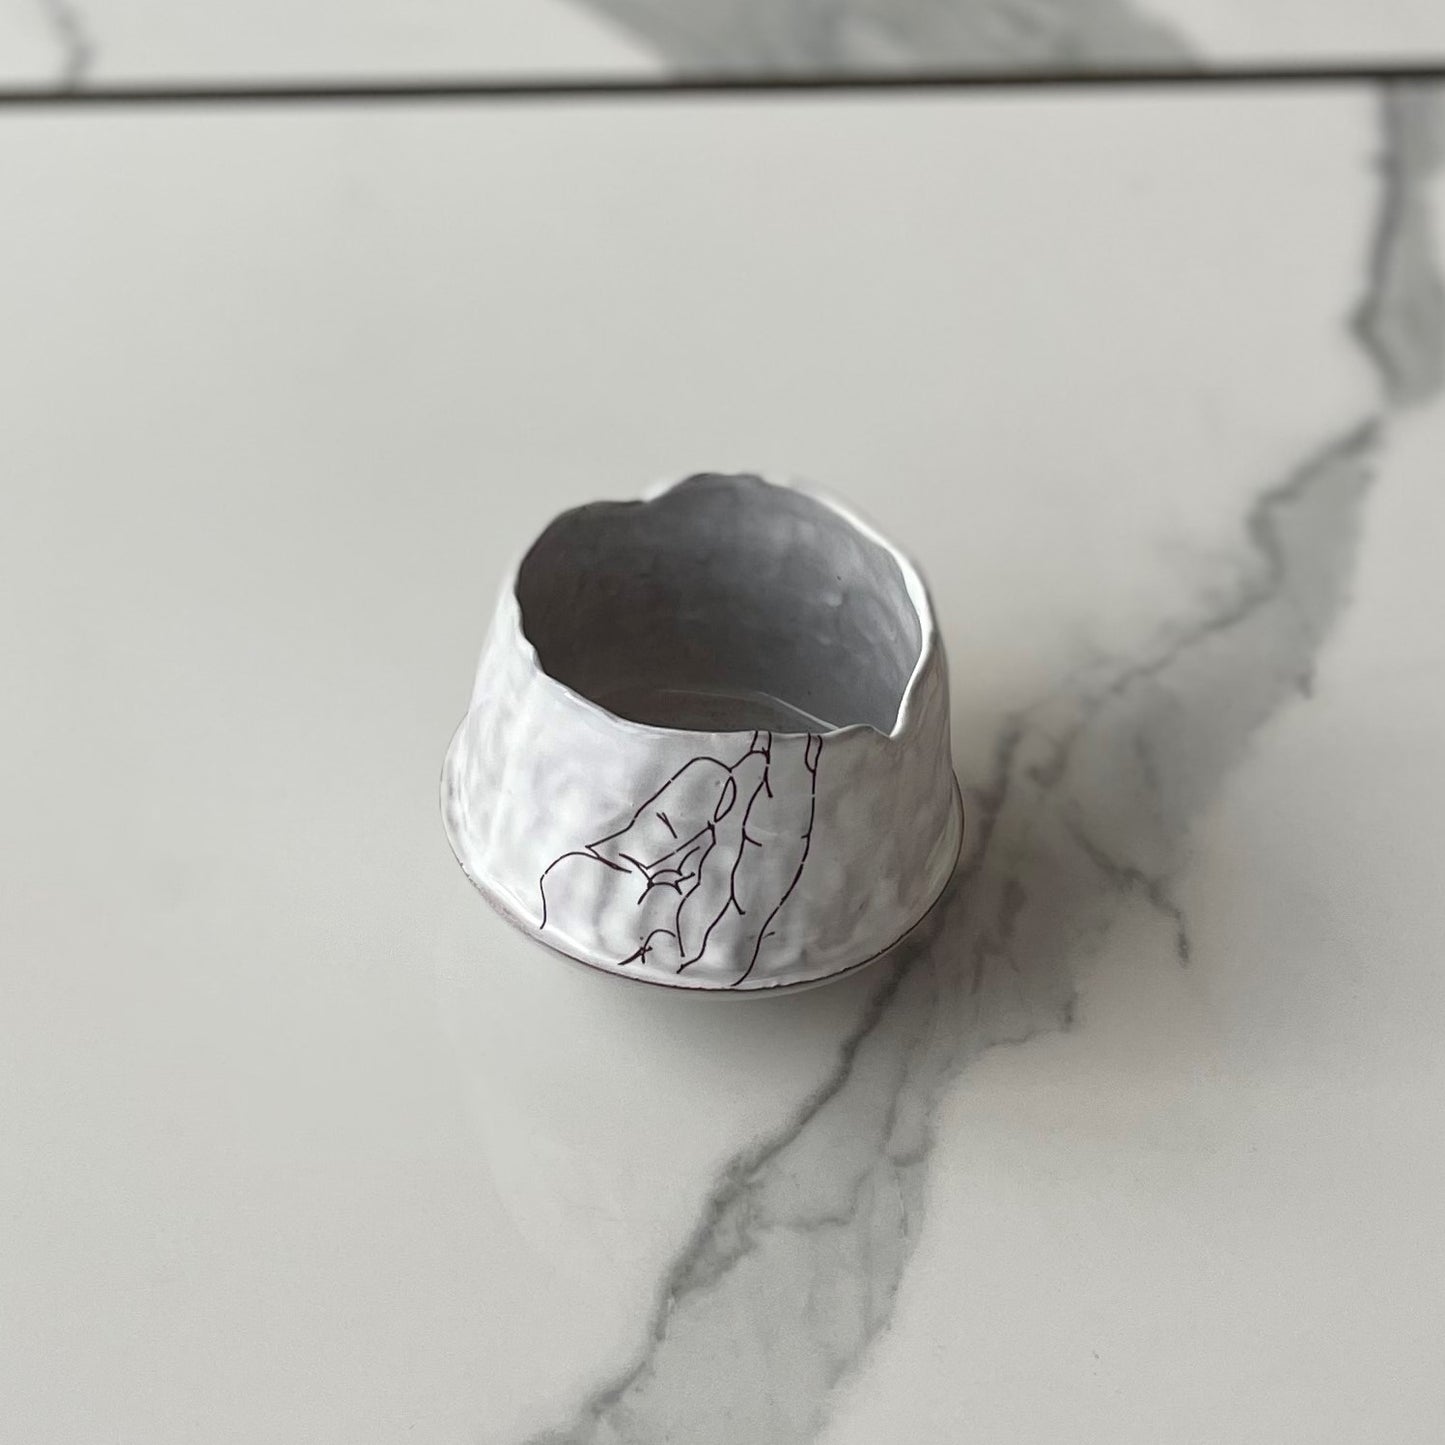 Small bowl with abstract hands